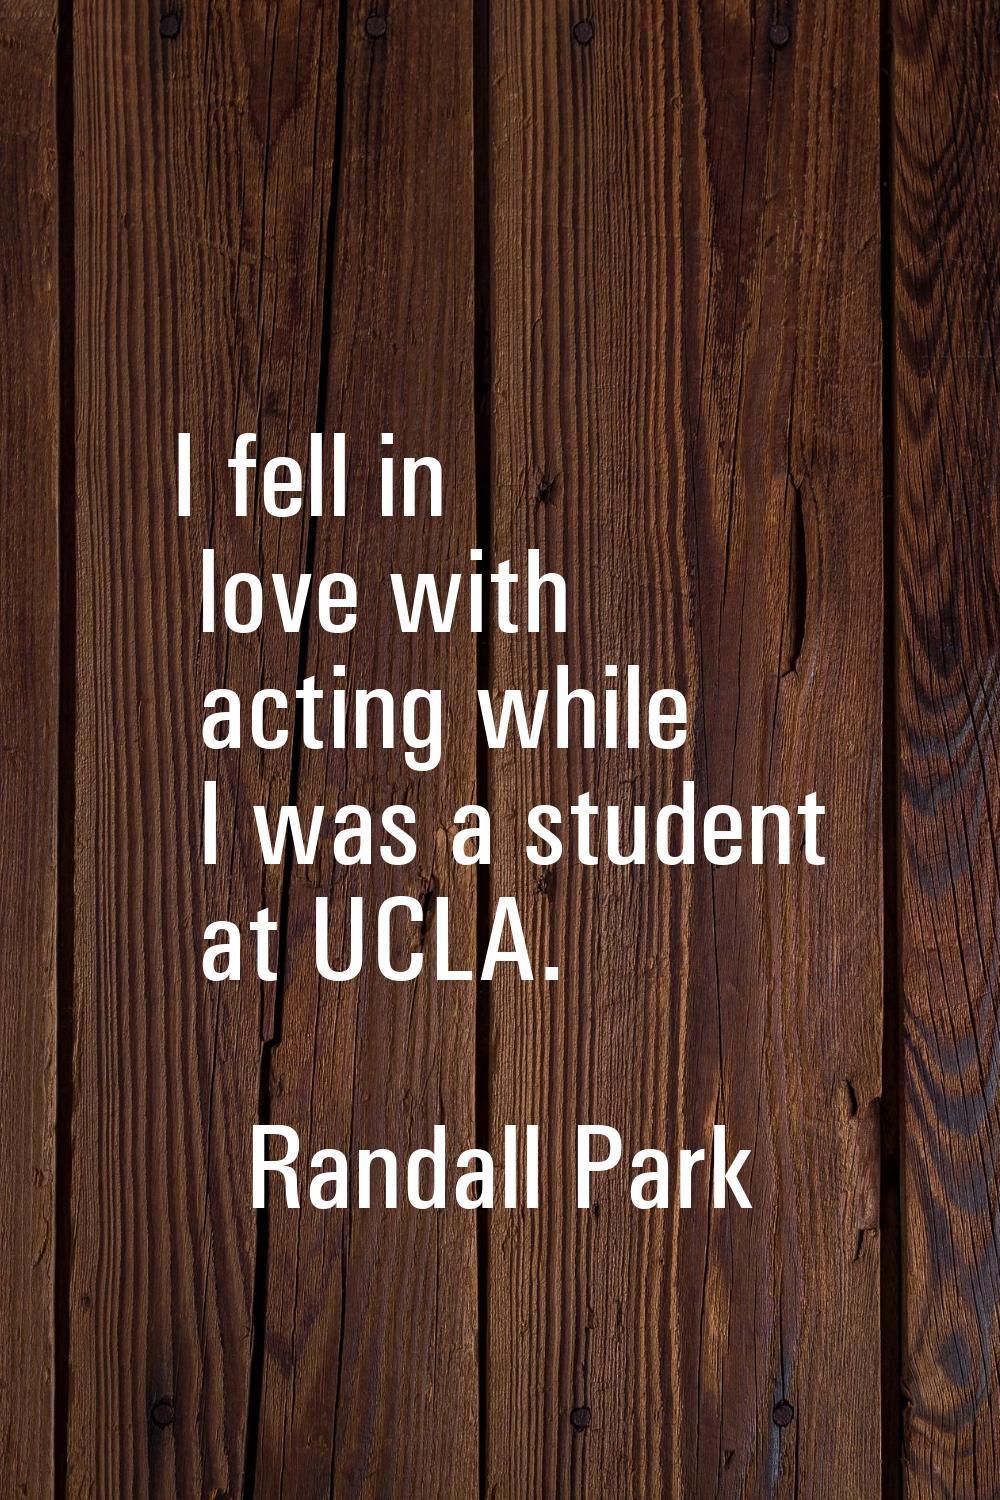 I fell in love with acting while I was a student at UCLA.